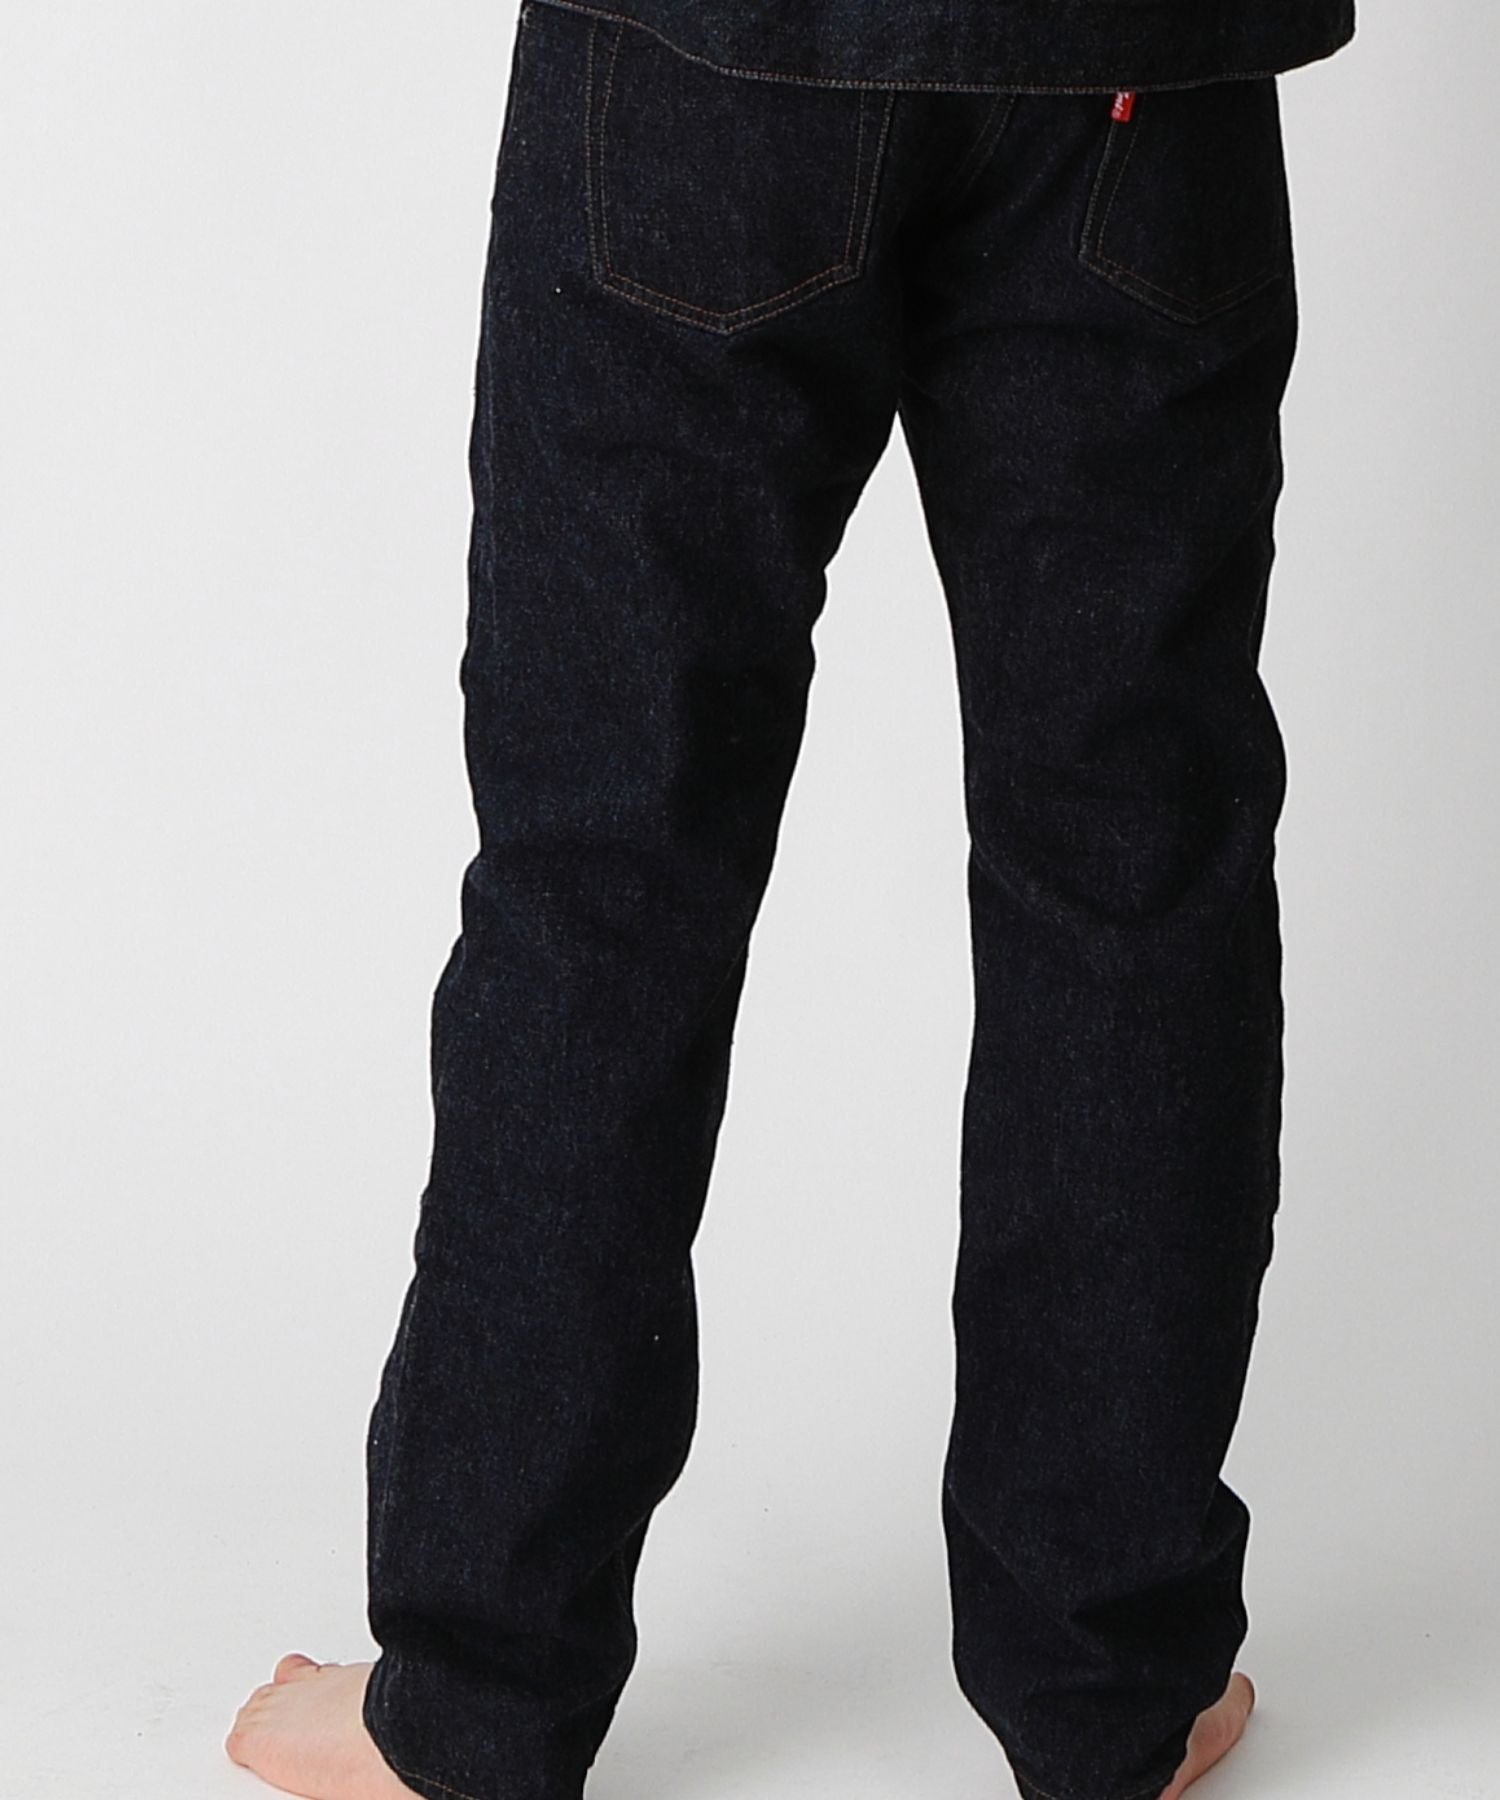 HQ DENIM】 5P TAPERED (TYPE 501 XX) – TMT OFFICIAL ONLINE STORE